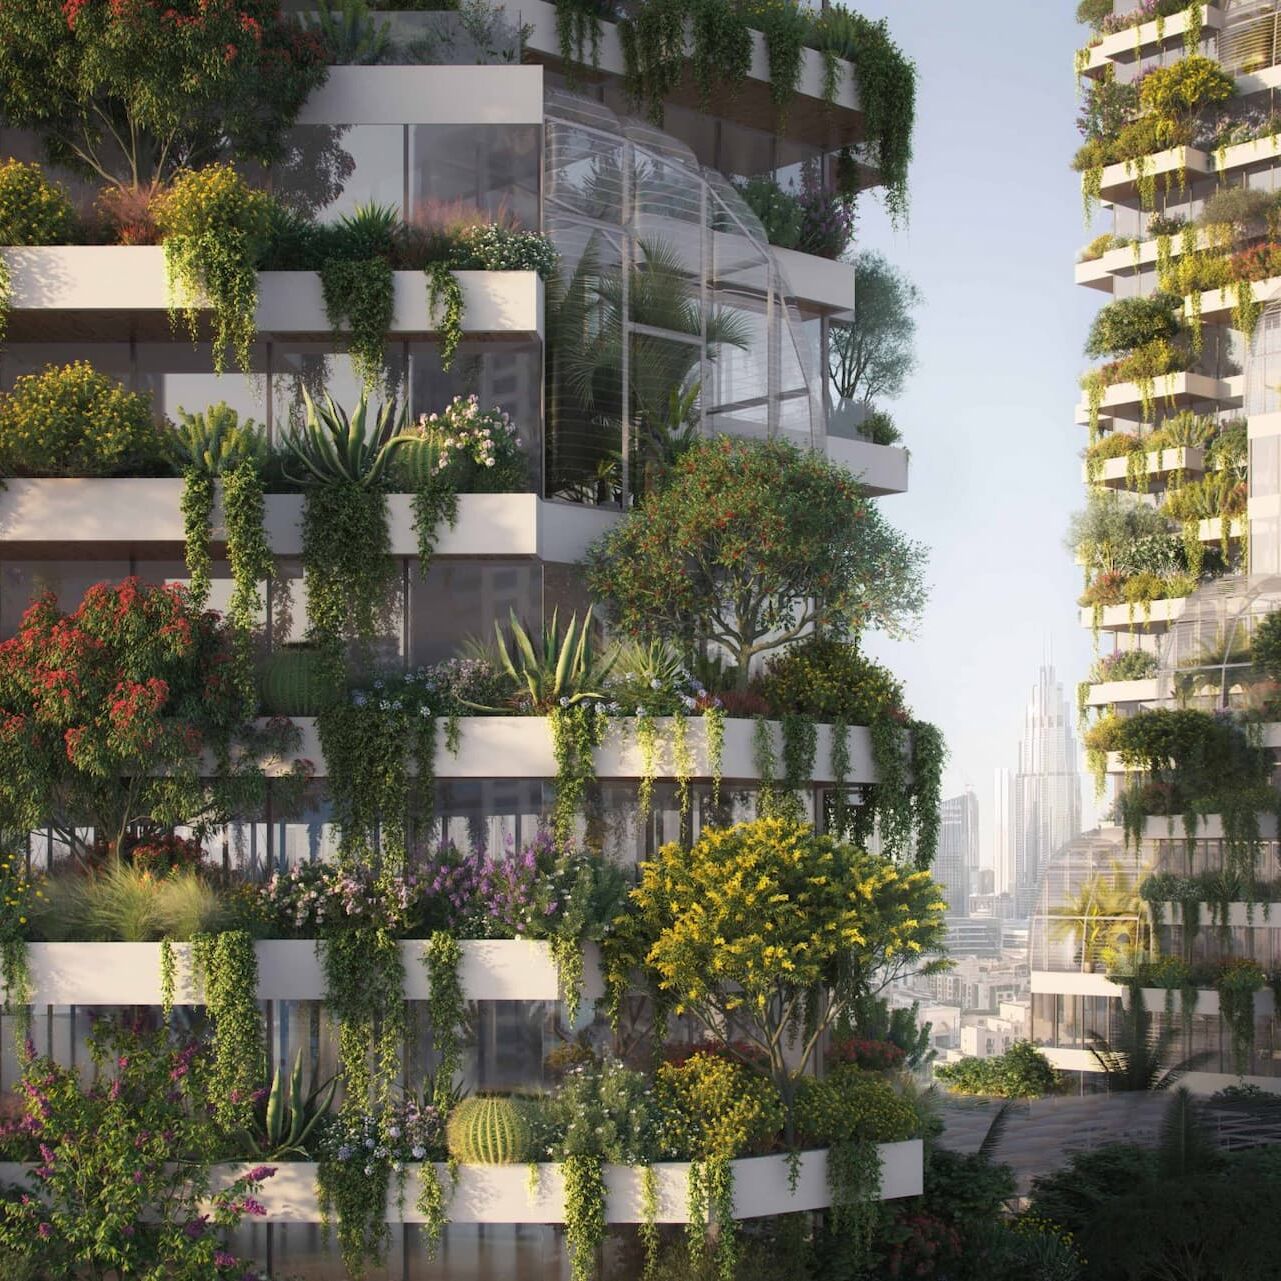 Vertical forest: a detail of the Dubai Vertical Forest, which will host over 27 trees that will work together to reduce pollution and promote an ideal microclimate (Photo: Stefano Boeri Architetti)